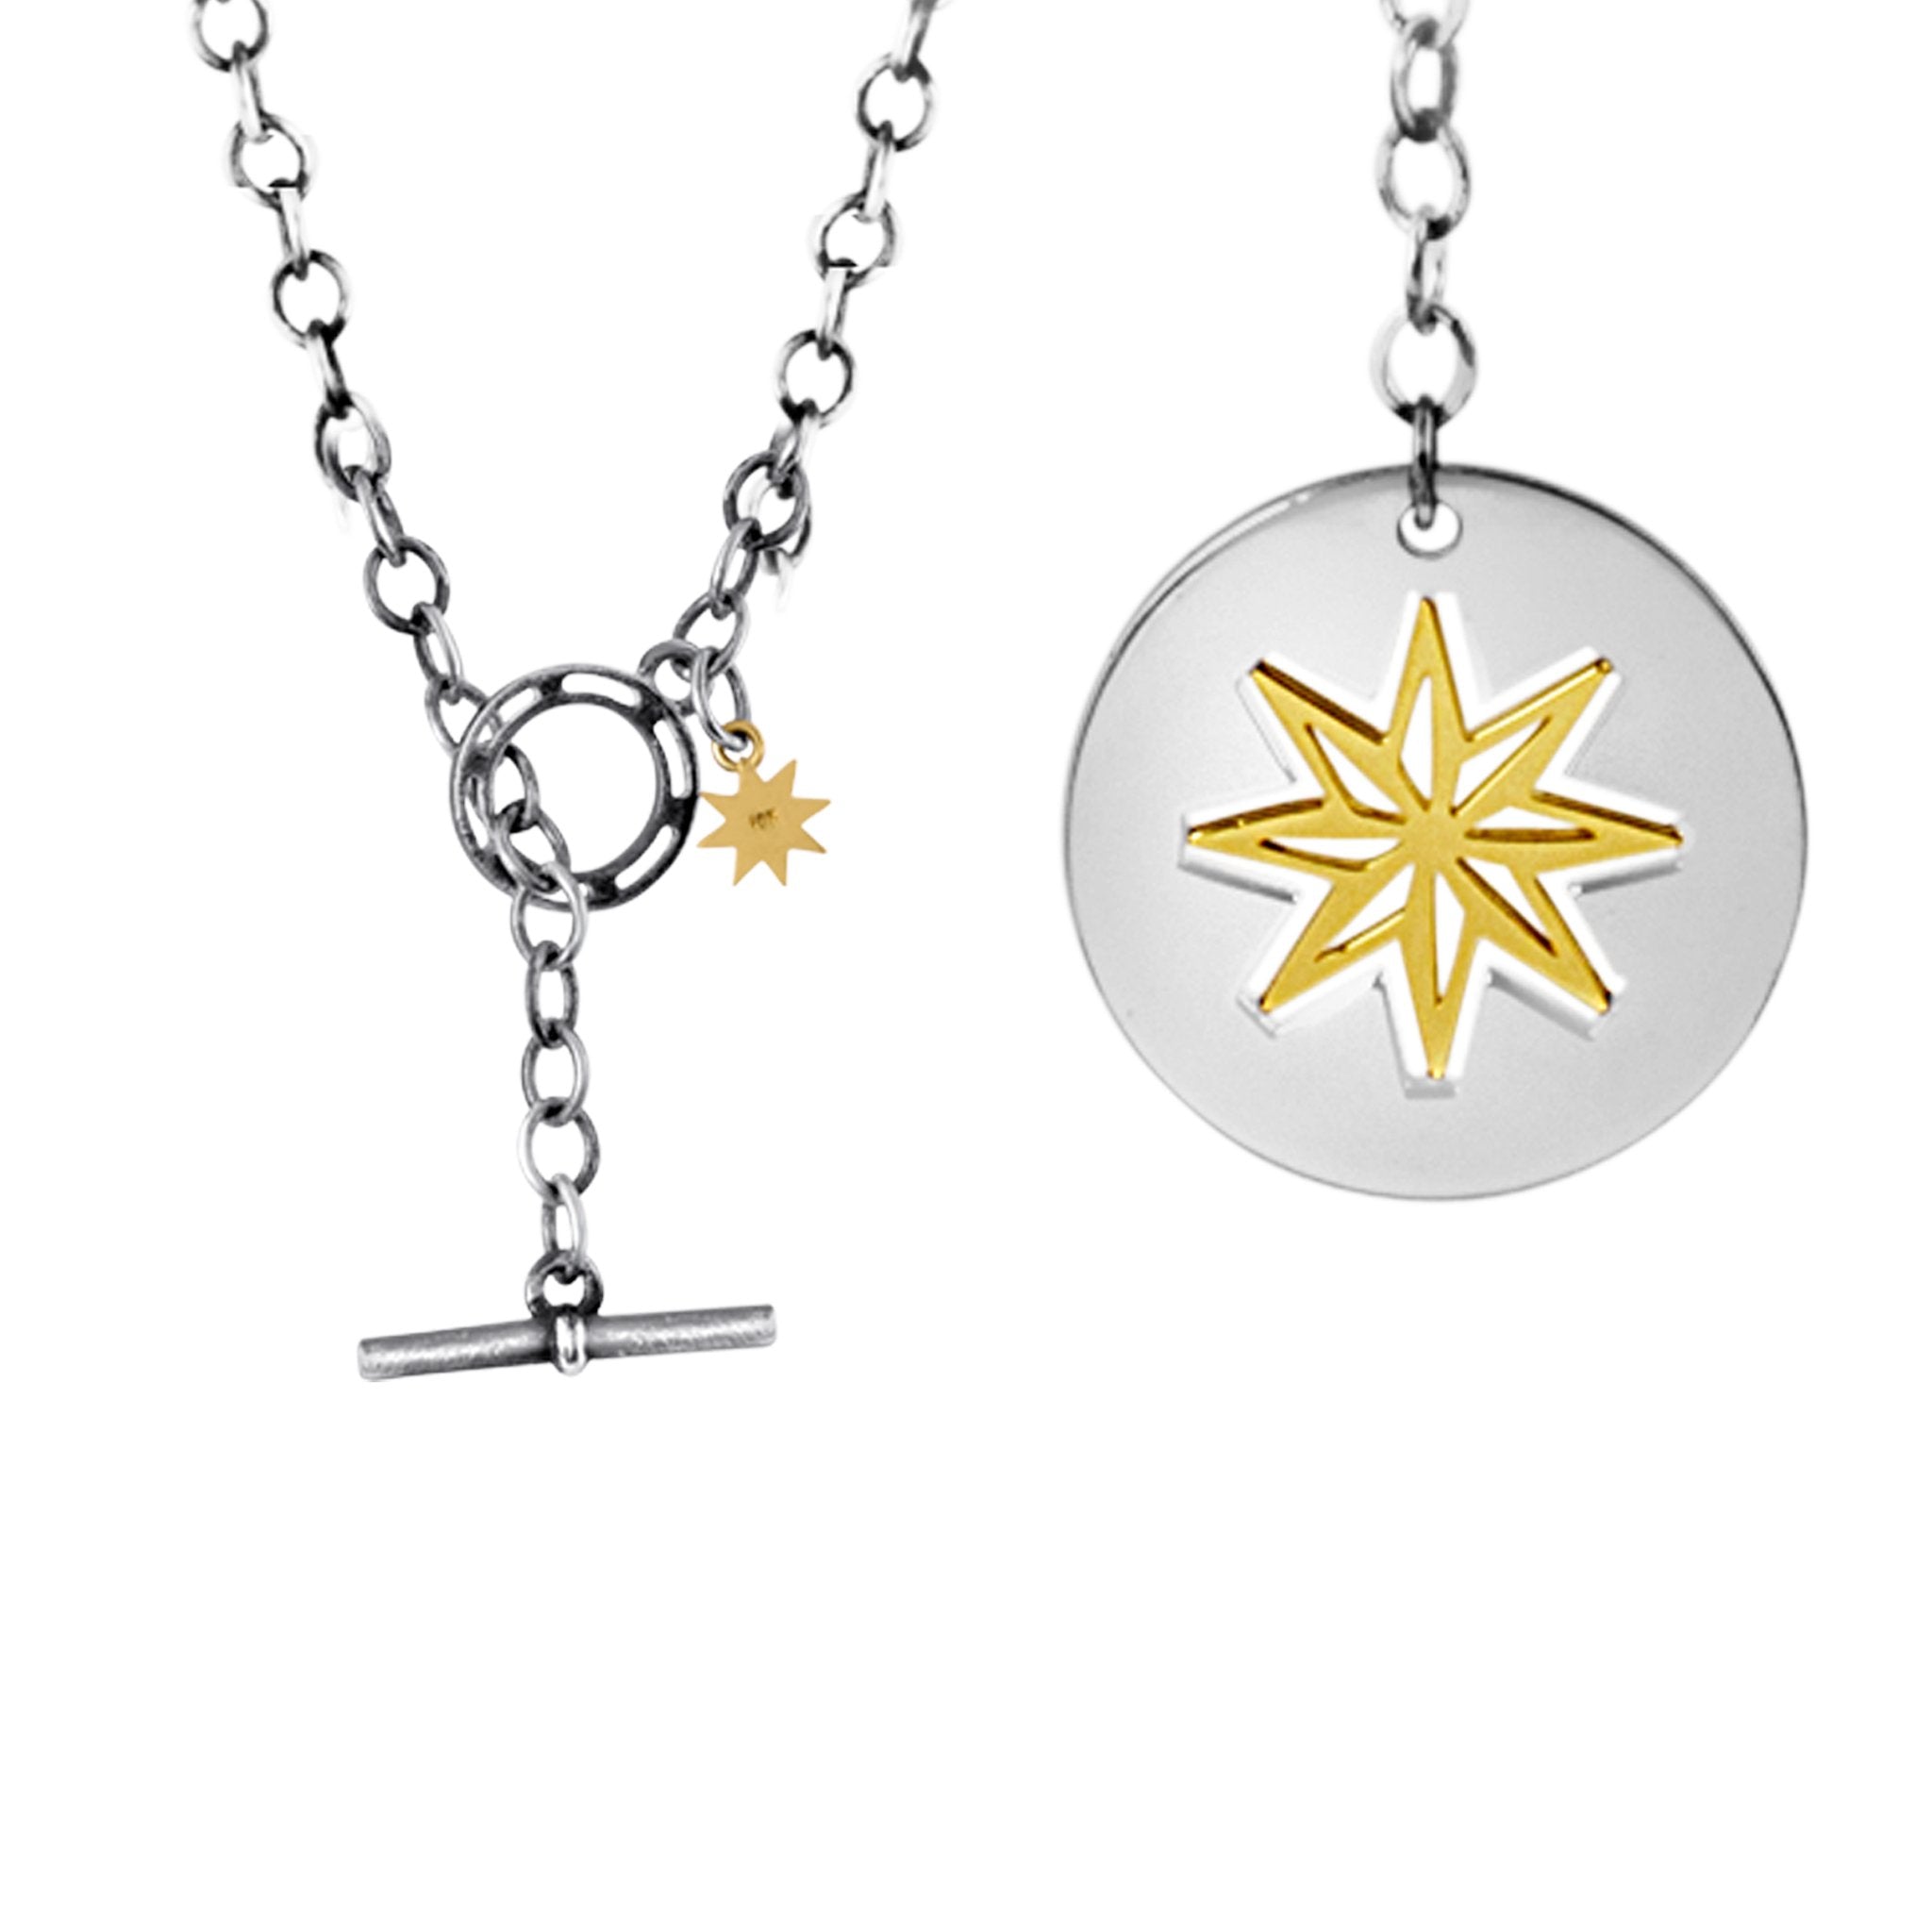 Star Pendant Necklace: 18k Gold, Rhodium Plate Silver